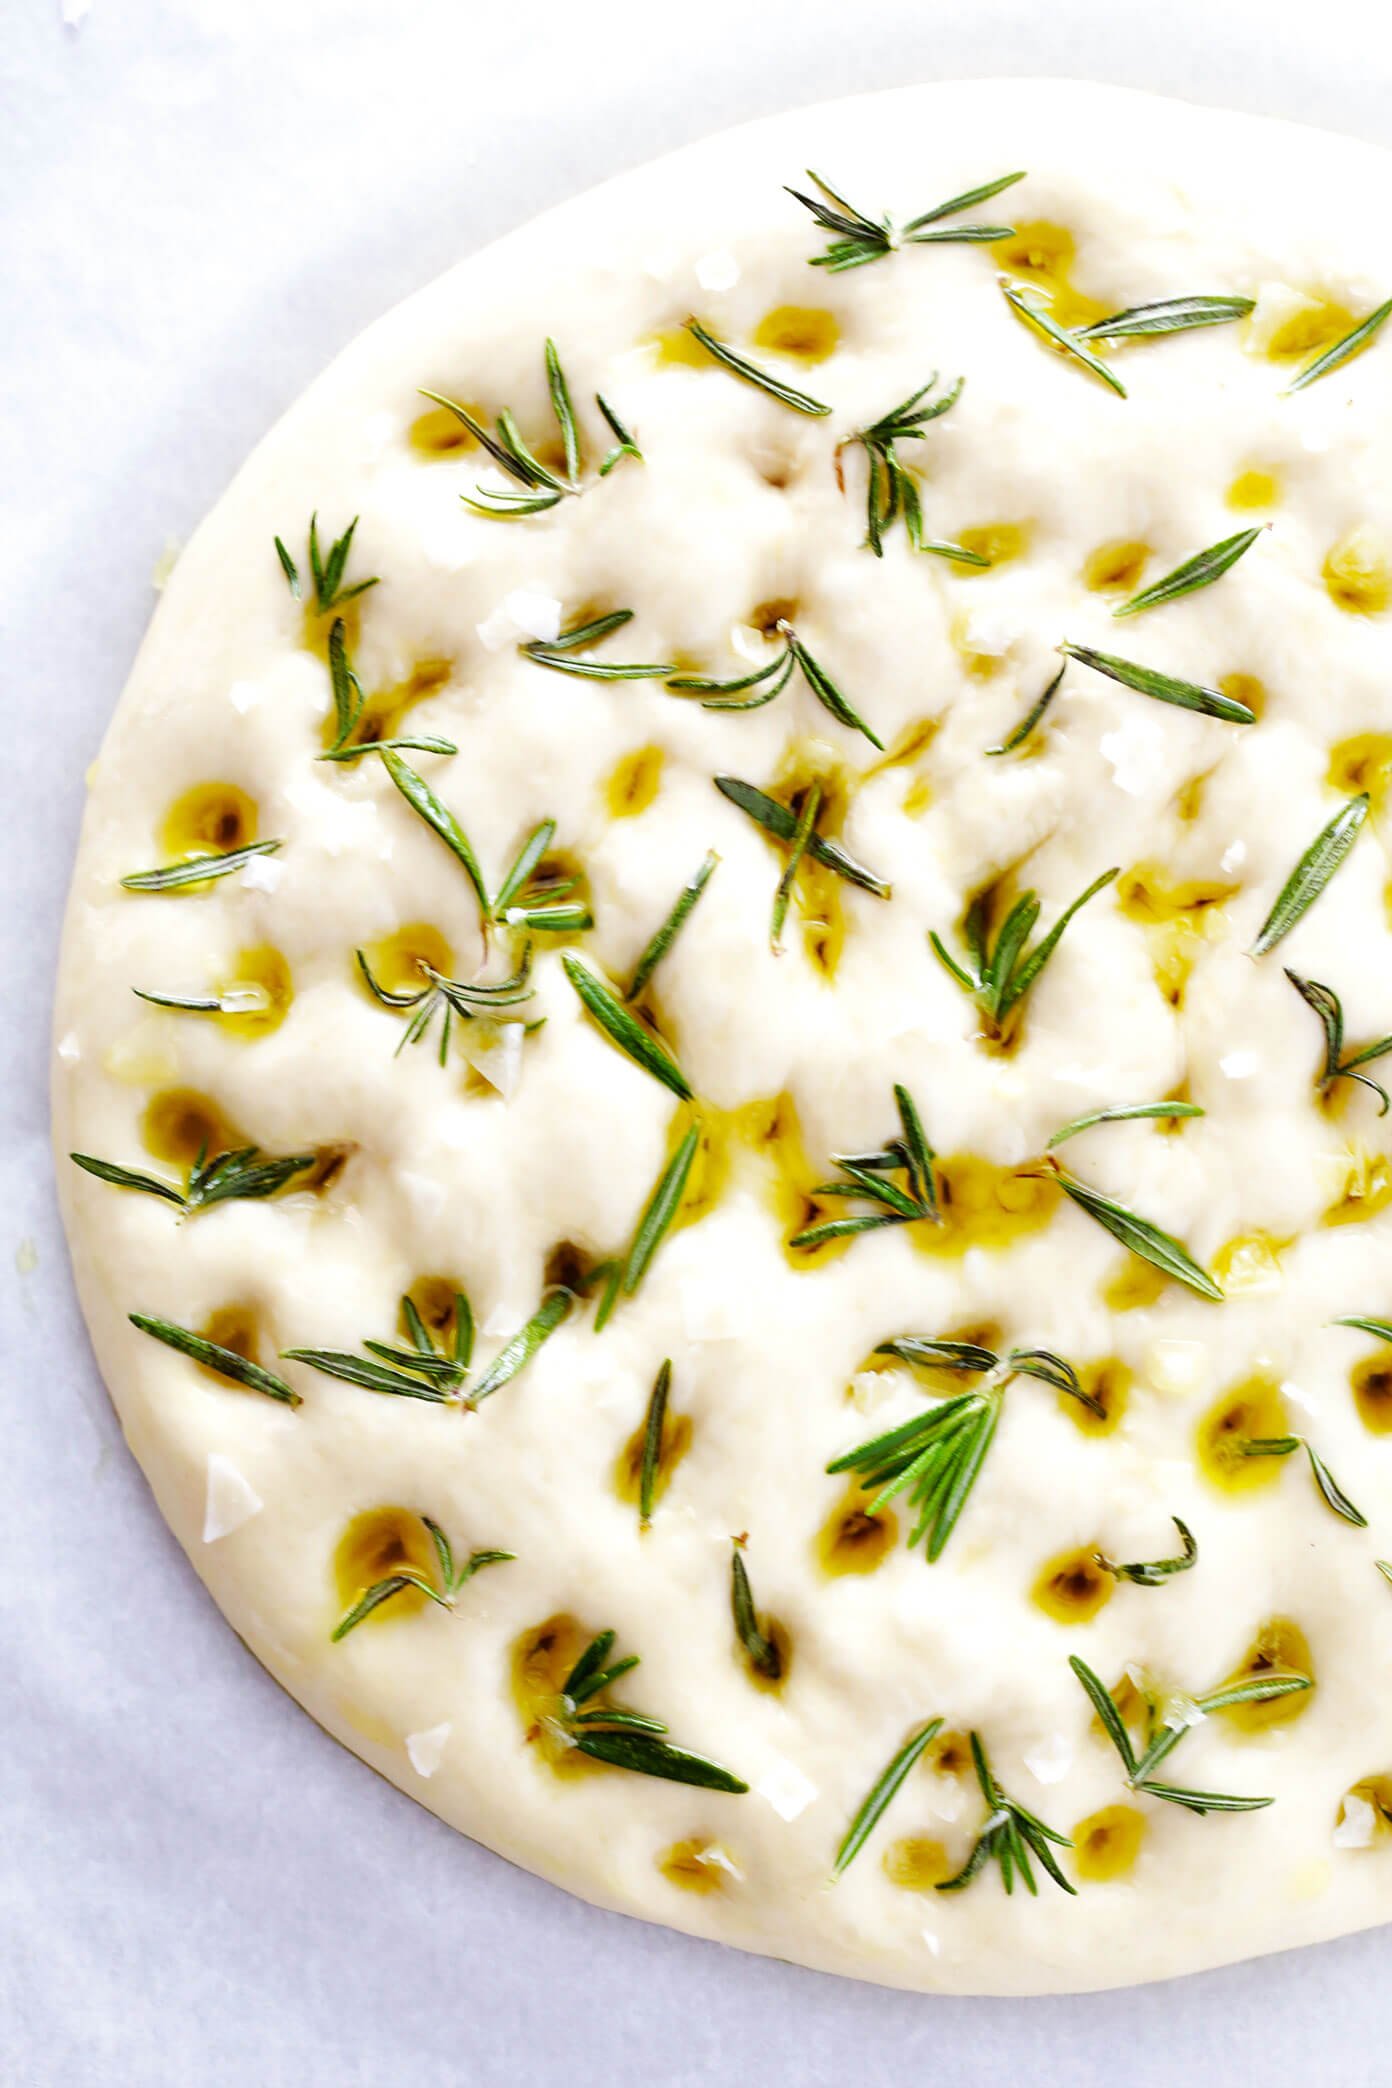 How To Make Focaccia Bread with Rosemary